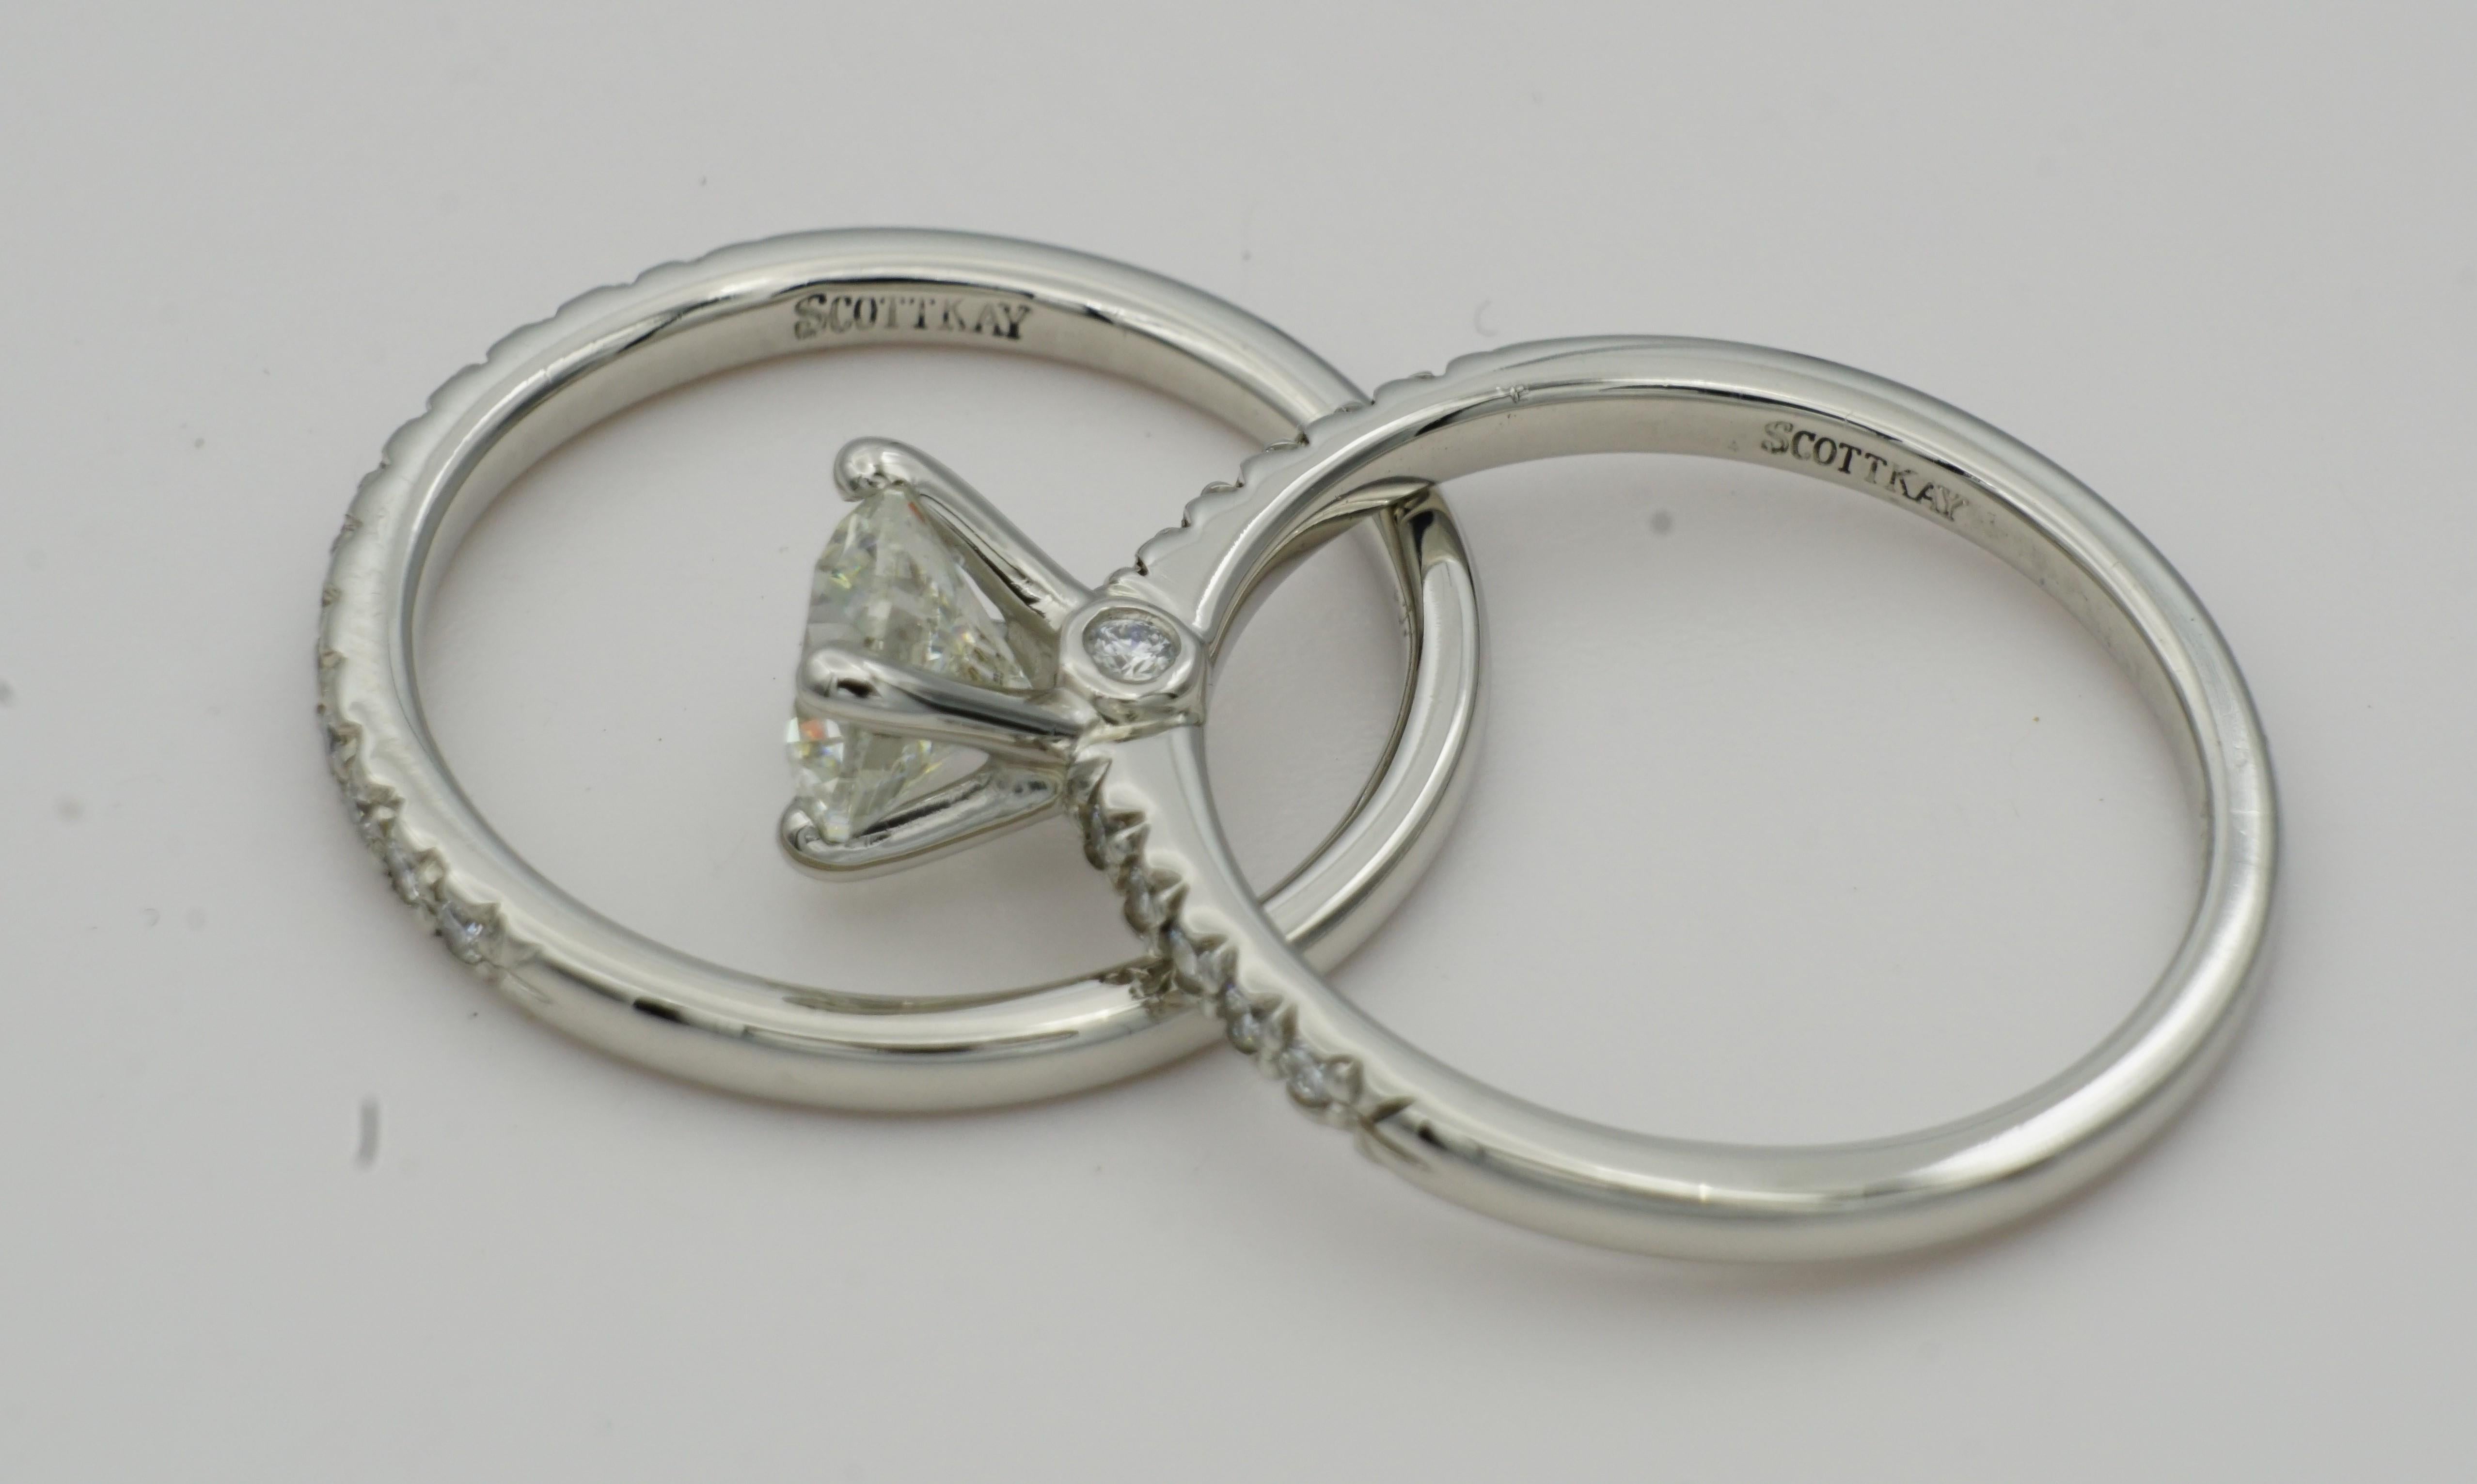 Designer Scott Kay Platinum Wedding set with a  1.00ct Round Brilliant Center Stone Diamond Wedding Set. The center diamond is H in color, SI2 in clarity, and well-cut. The engagement ring has 12 small round brilliant diamonds that are approximately